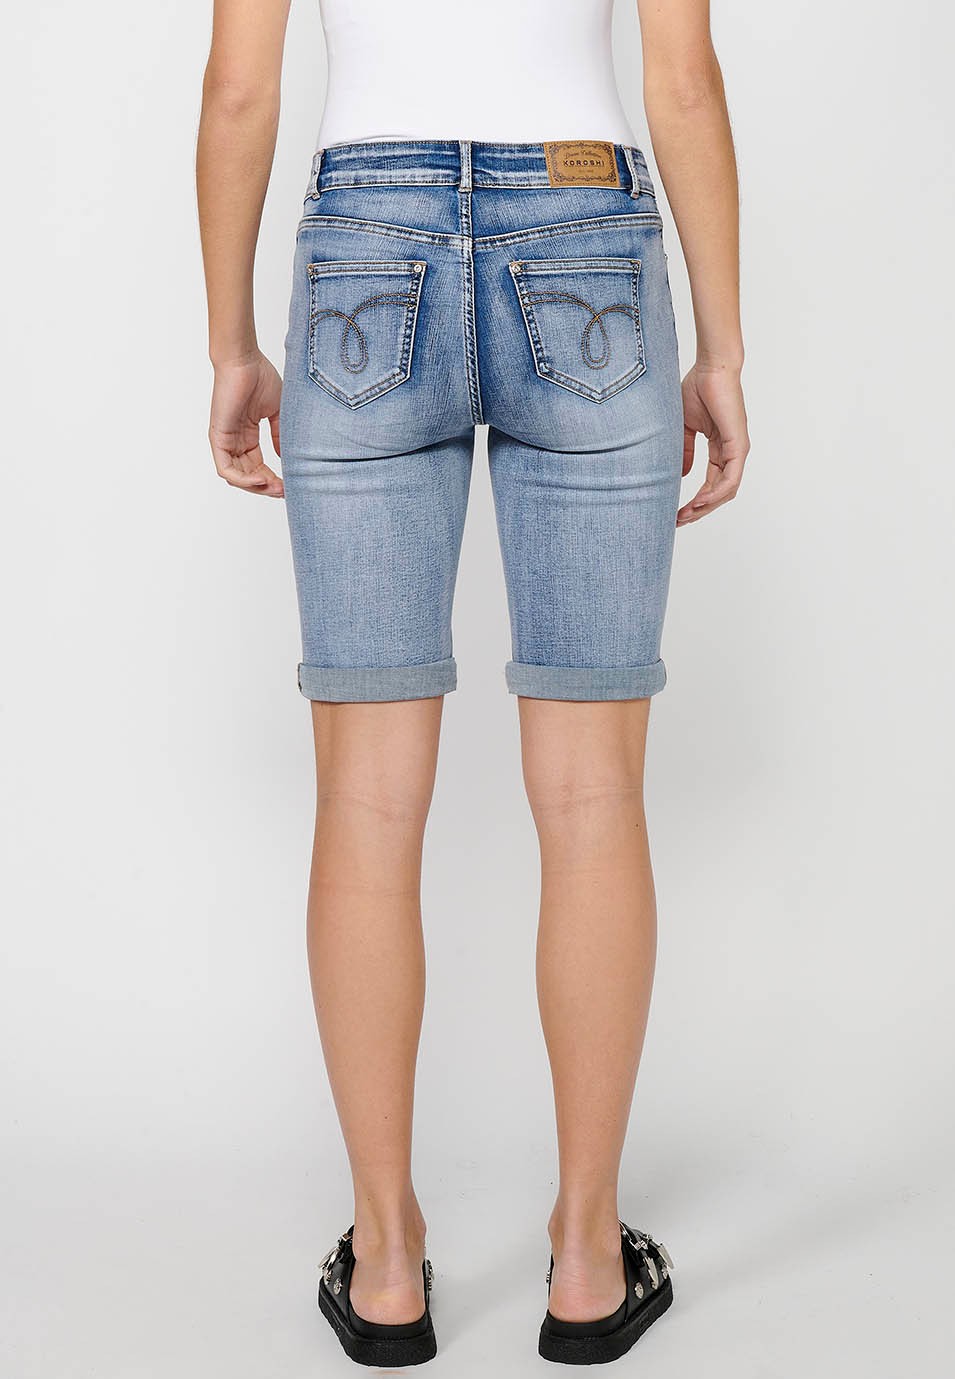 Short shorts finished in turn with details of front patches and removable chain decoration with front closure with zipper and button in Blue for Women 5